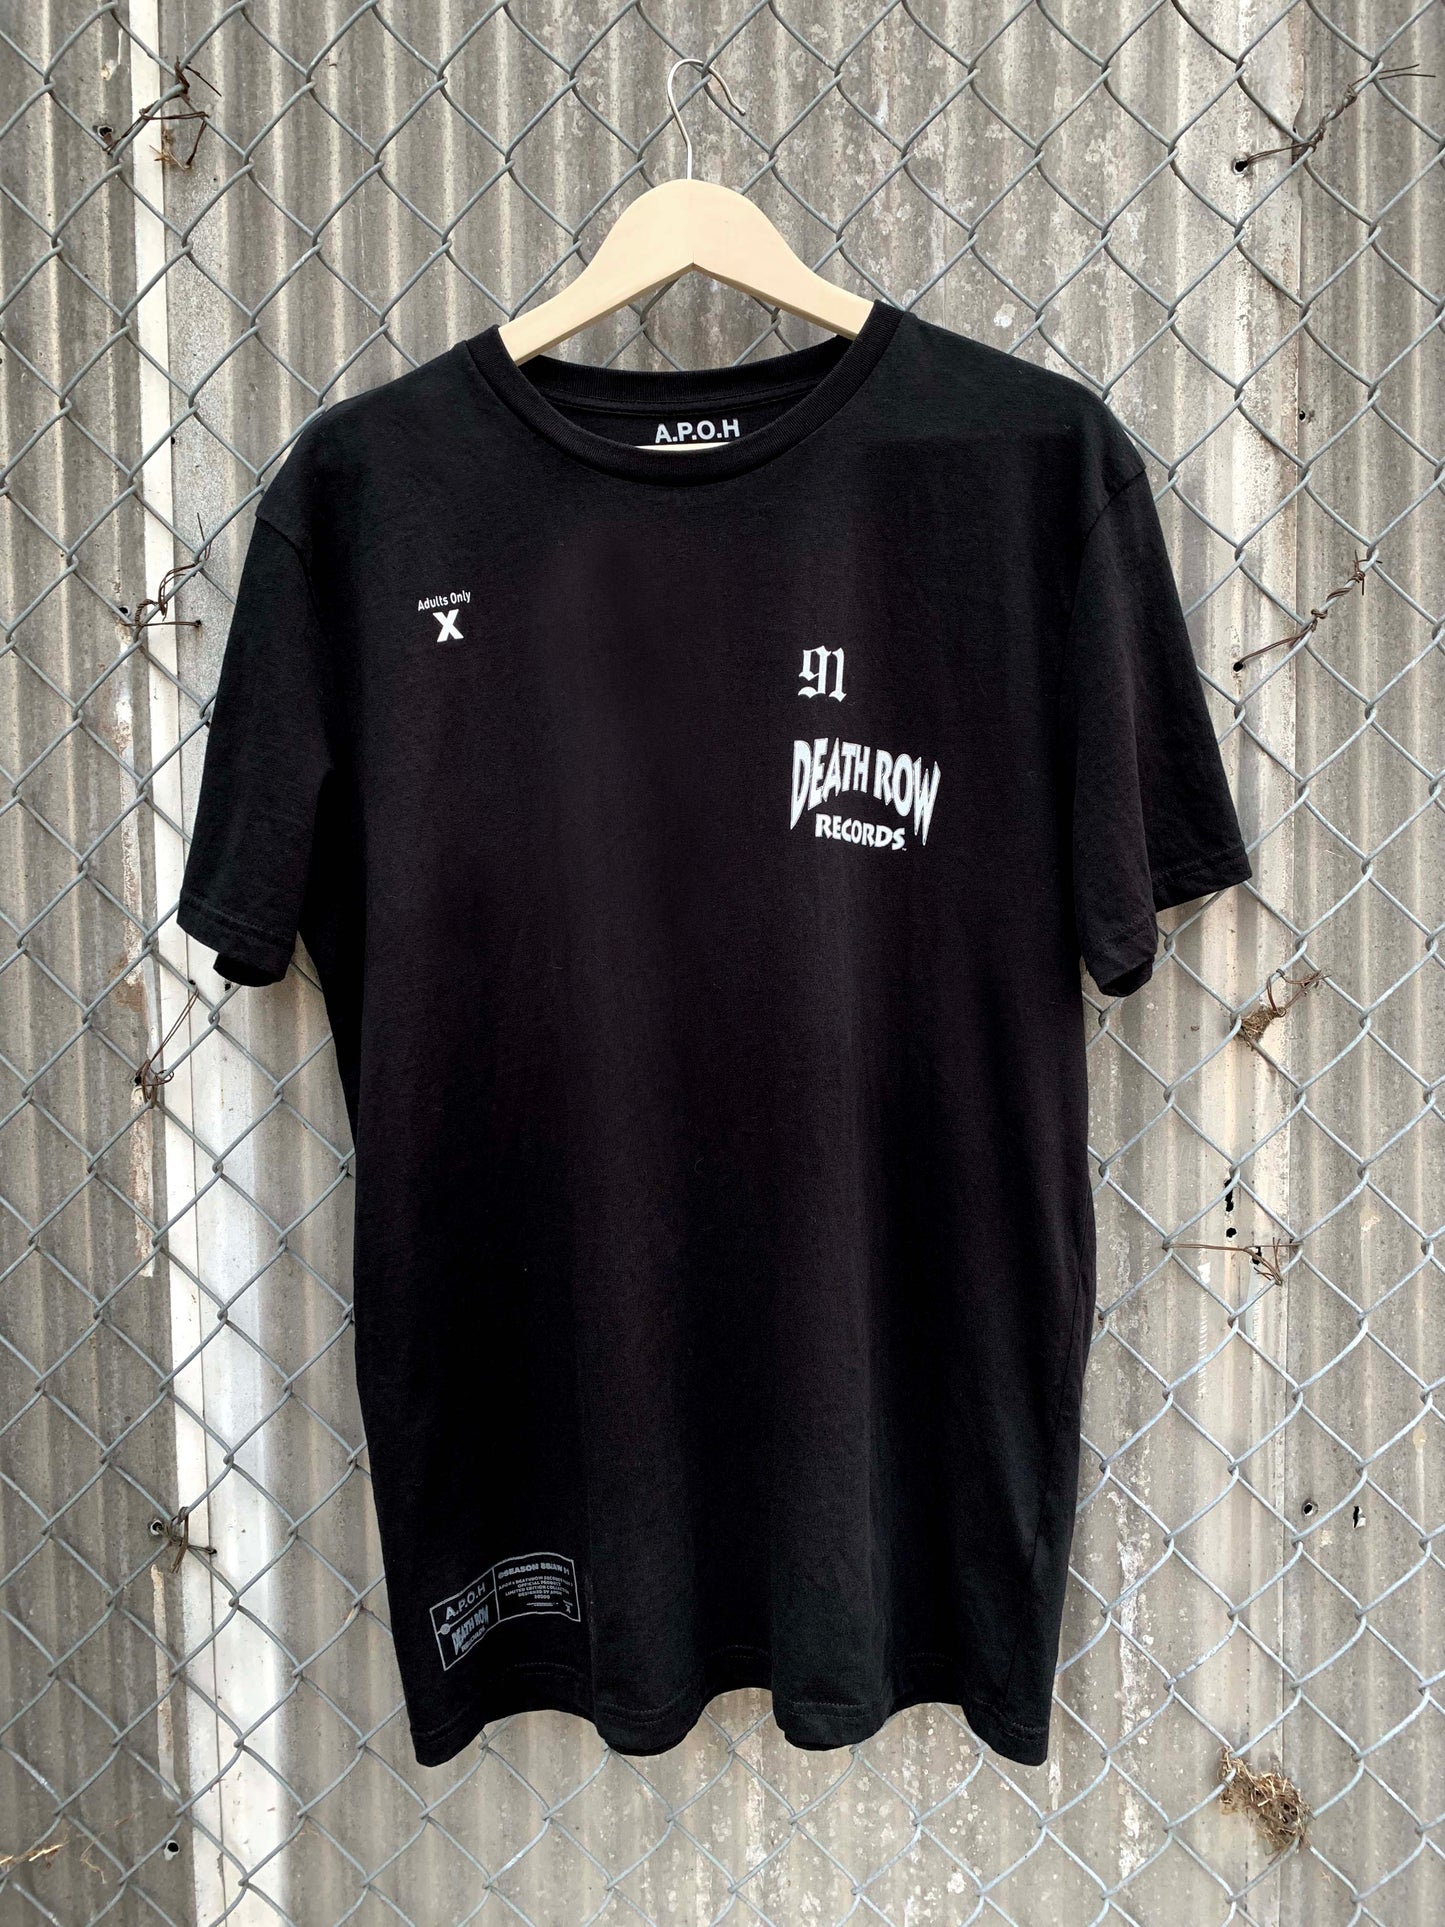 APOH X Death Row Records / East LA Sustainable T-shirt